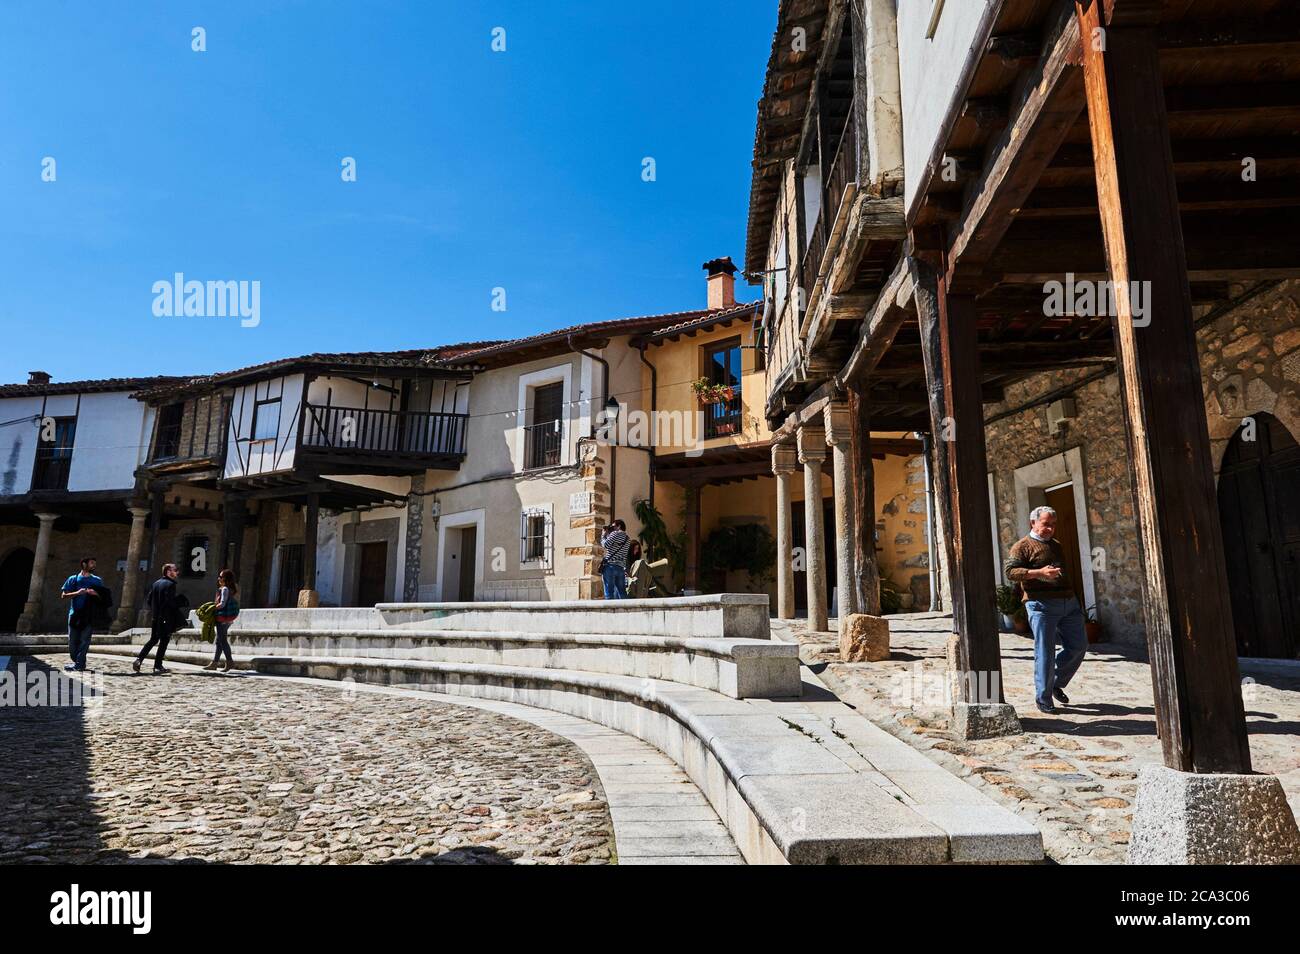 People visiting the medieval square in Cuacos de Yuste, Extremadura (Spain) Stock Photo